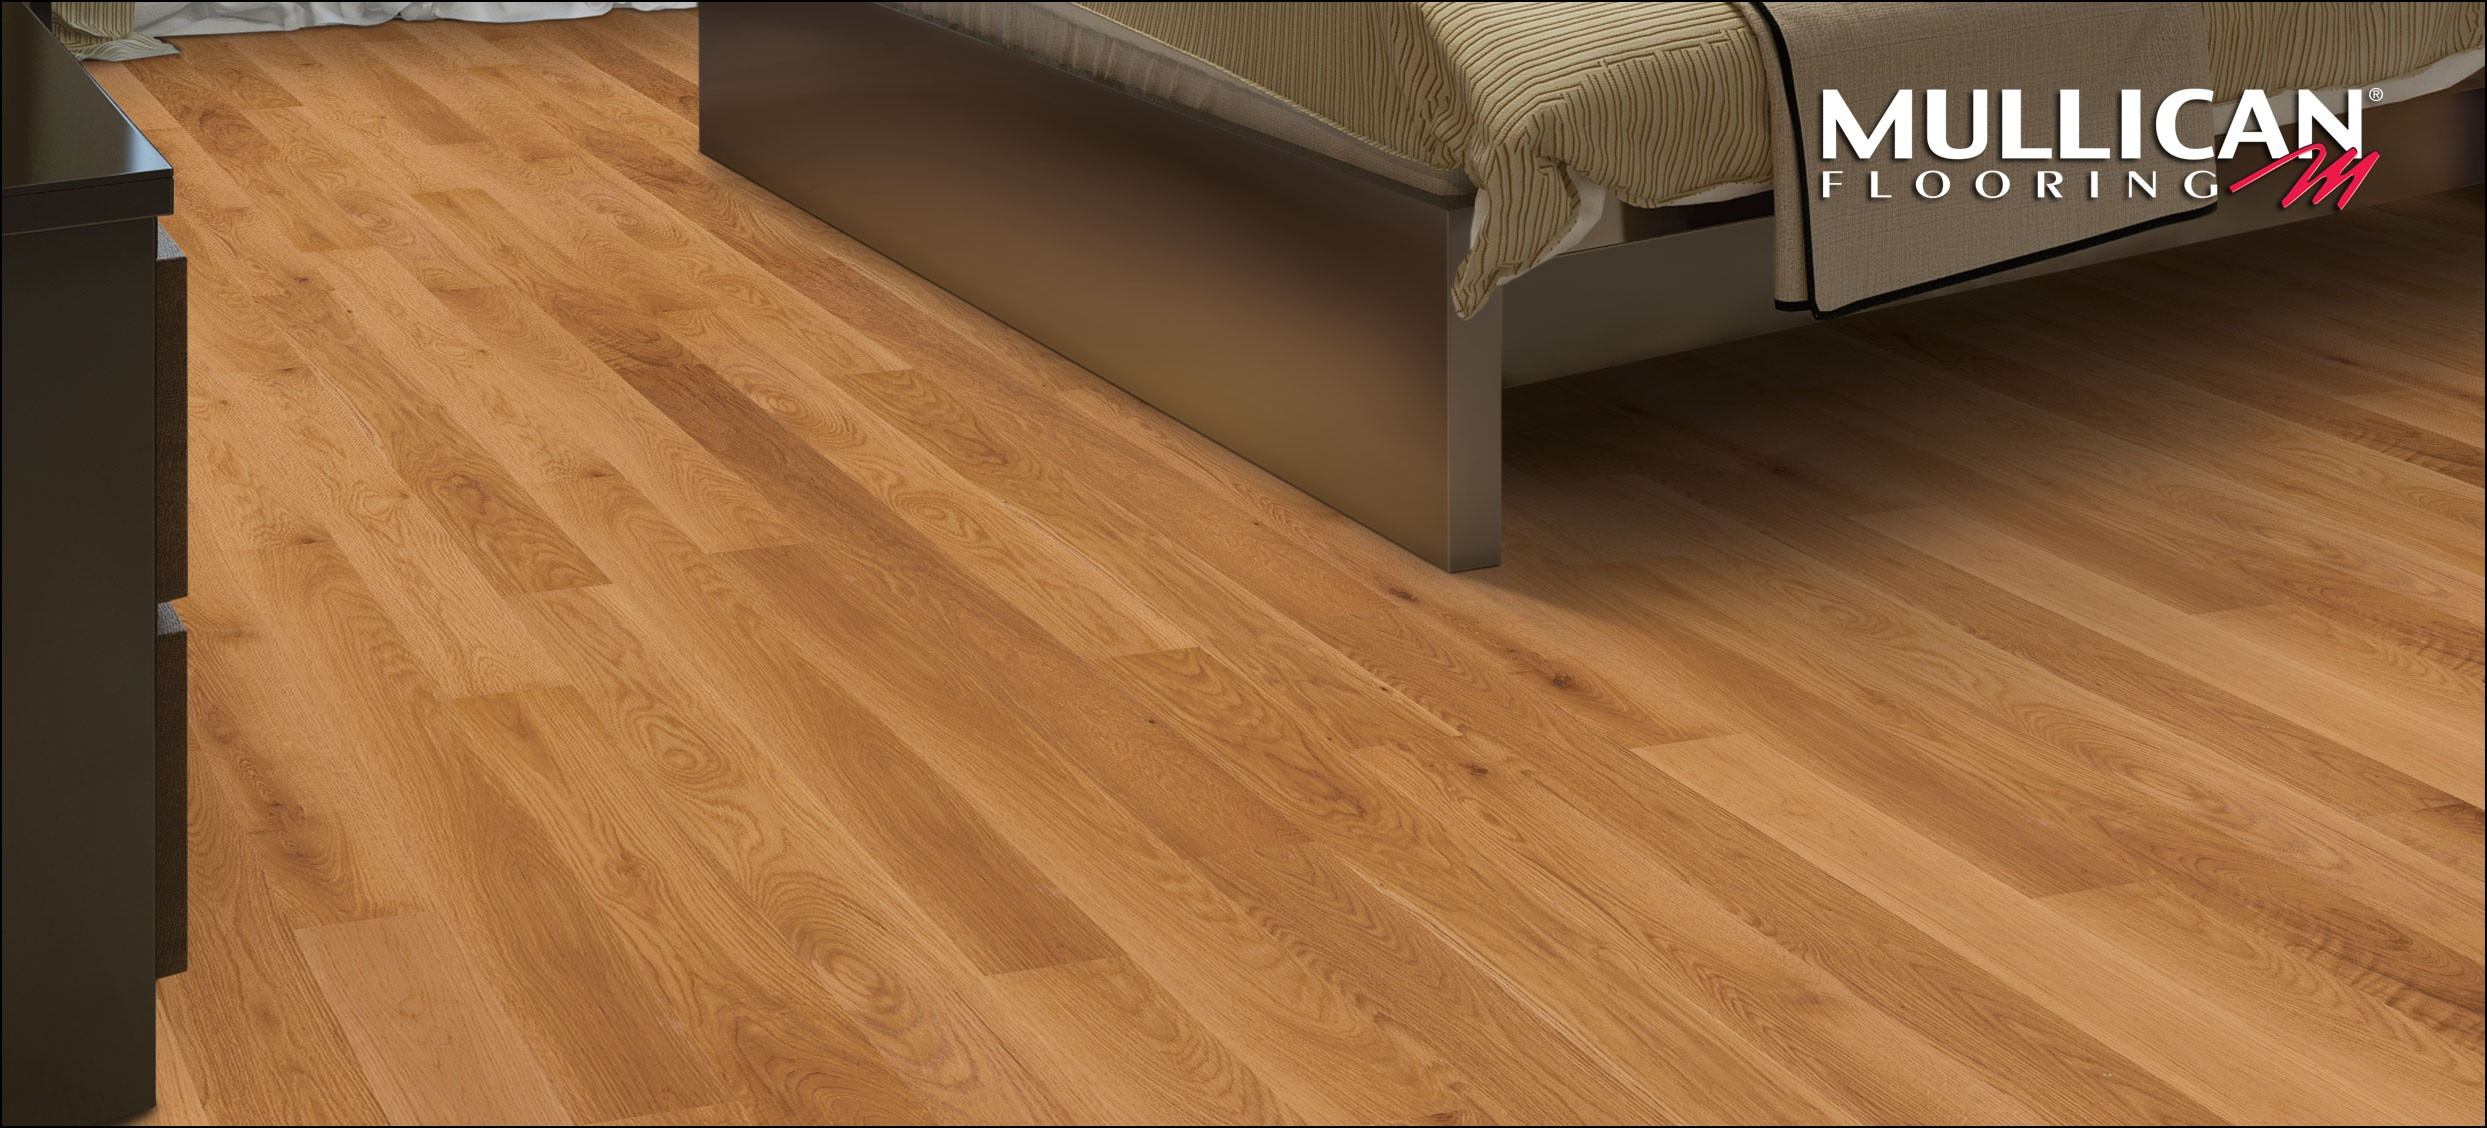 hardwood flooring labor cost per square foot of hardwood flooring suppliers france flooring ideas with regard to hardwood flooring installation san diego collection mullican flooring home of hardwood flooring installation san diego